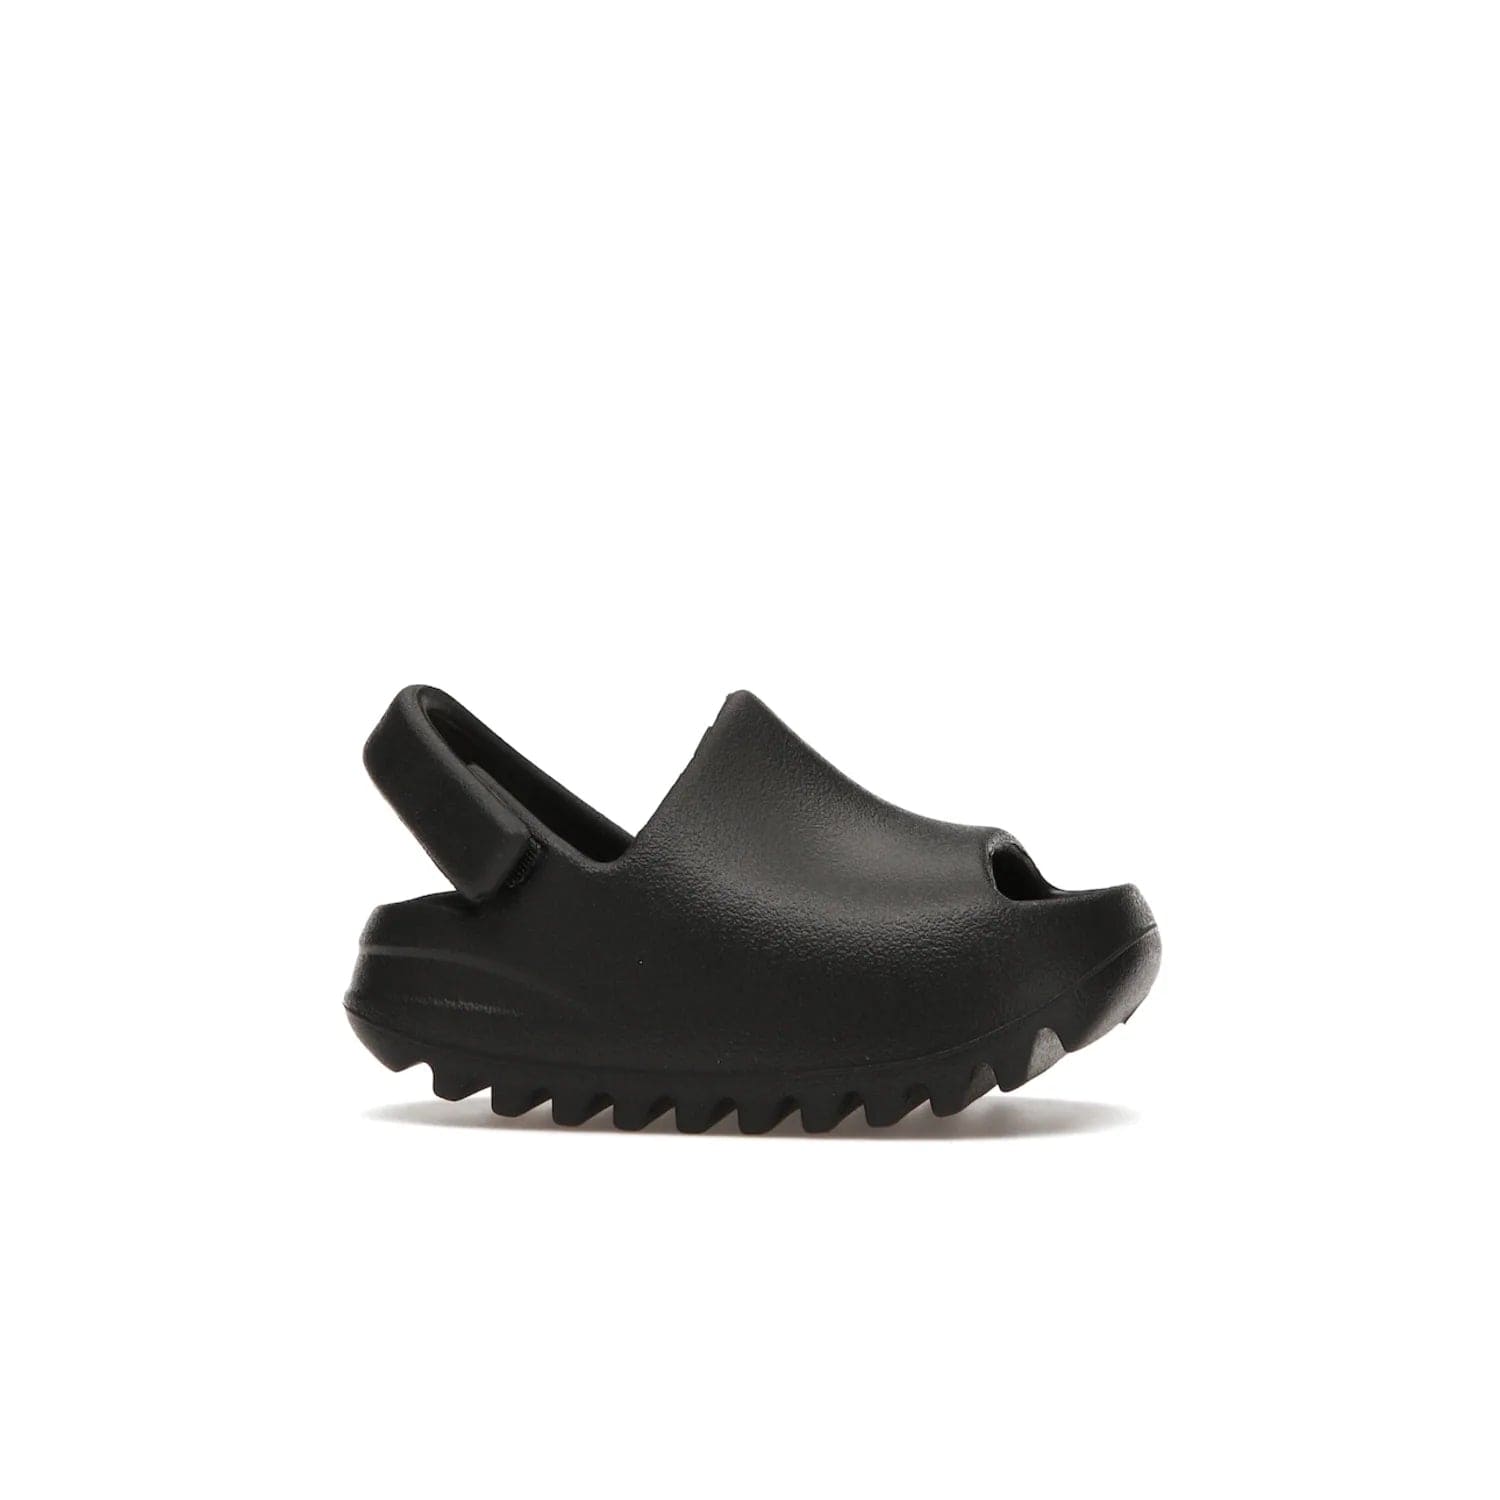 adidas Yeezy Slide Onyx (Infants) - Image 2 - Only at www.BallersClubKickz.com - The Adidas Yeezy Slide Onyx (Infant) is a classic silhouette with unique features and durable EVA foam. Released in May 2021 with a starting price of $70, it's no wonder it quickly gained popularity with its cool, minimalist look.